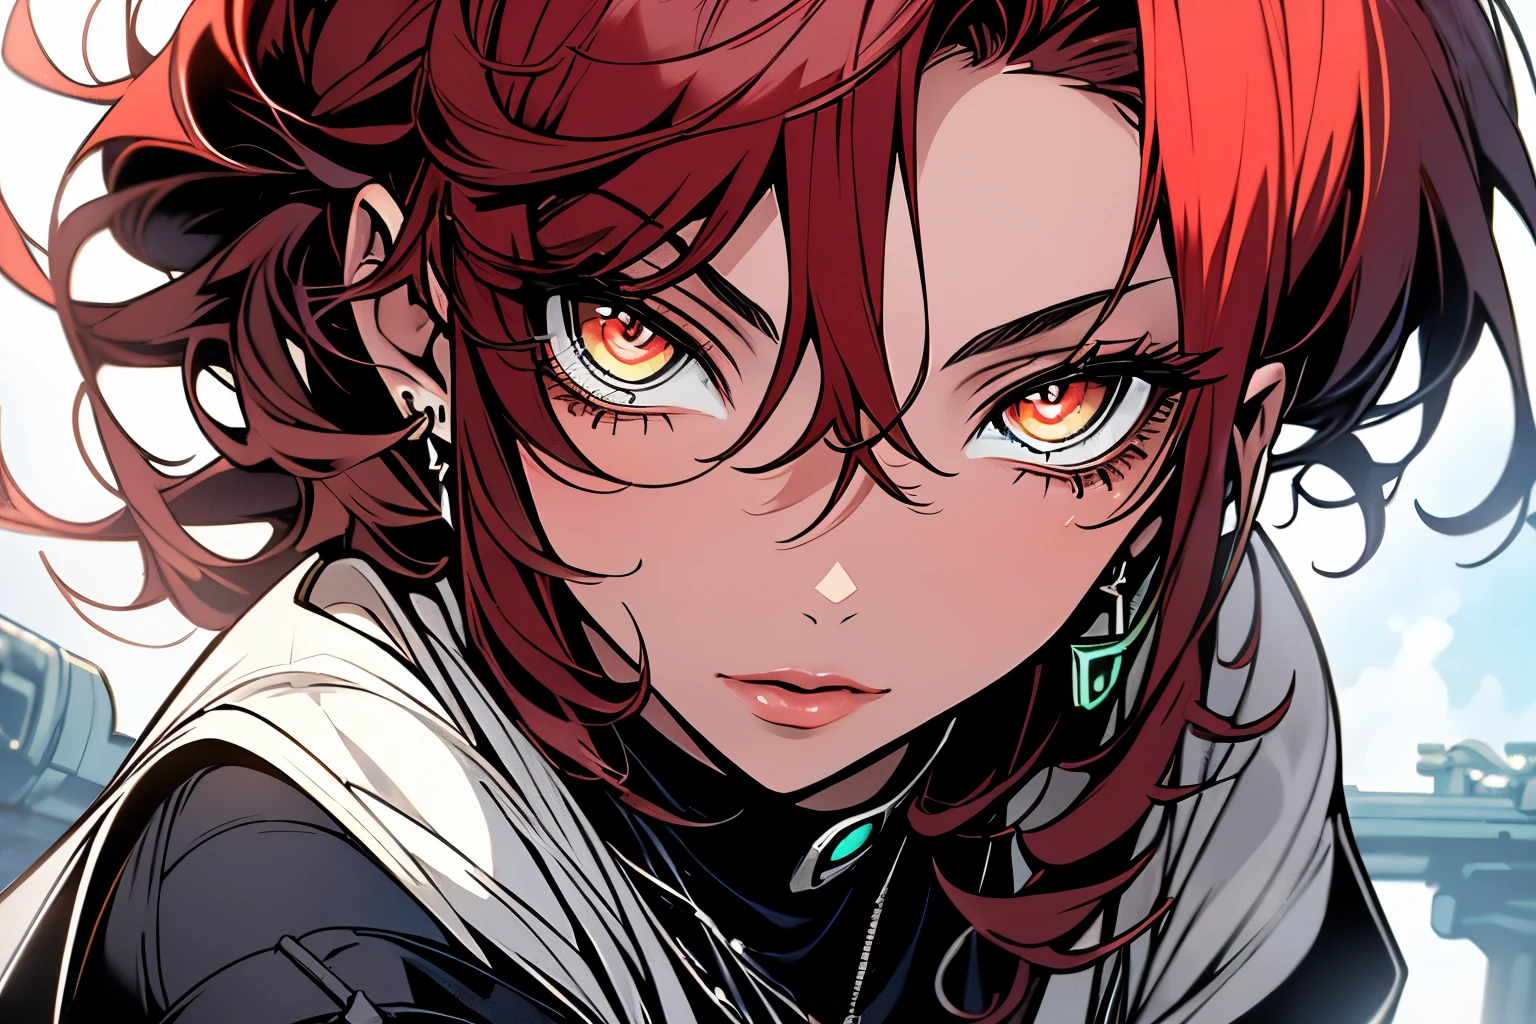 (masterpiece, top quality, best quality, official art, beautiful and aesthetic:1.2), (1girl:1.3), Charmer, Tall, Slim, Oval Face, Olive Skin, Red Hair, jade Eyes, Straight Nose, Pouty Lips, Prominent Chin, Shoulder-Length Hair, Curly Hair, High Messy Bun, round breasts, Dangle earrings, green, sheer lipstick, A woman with a sleek pixie cut and dressed in a futuristic and futuristic outfit, looking at viewer,close-up, limited palette, low contrast,